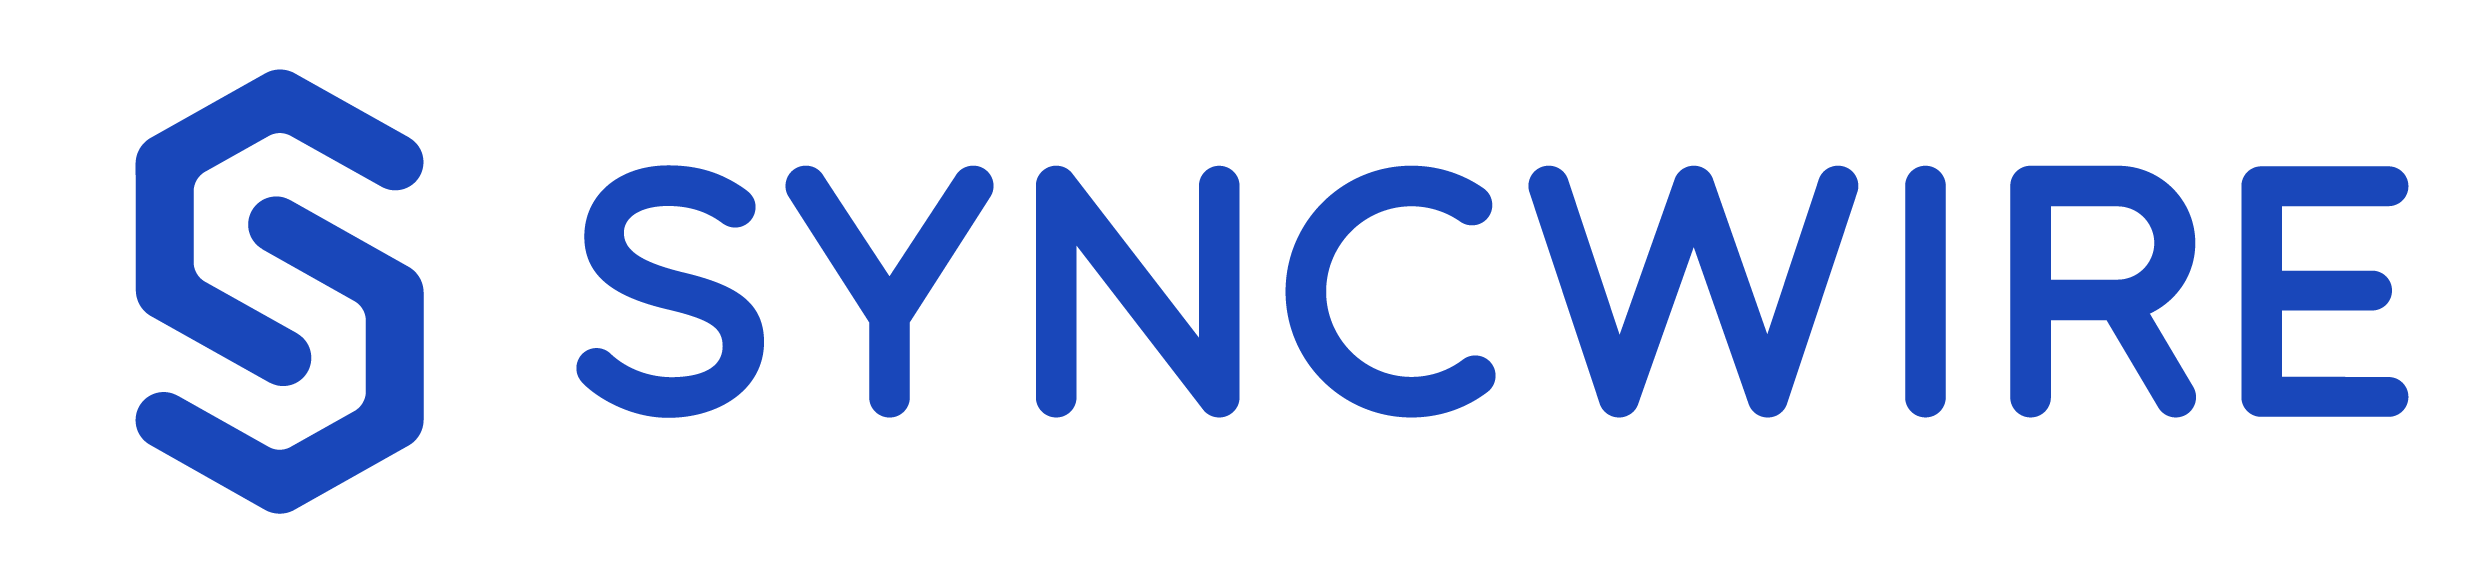 SYNCWIRE